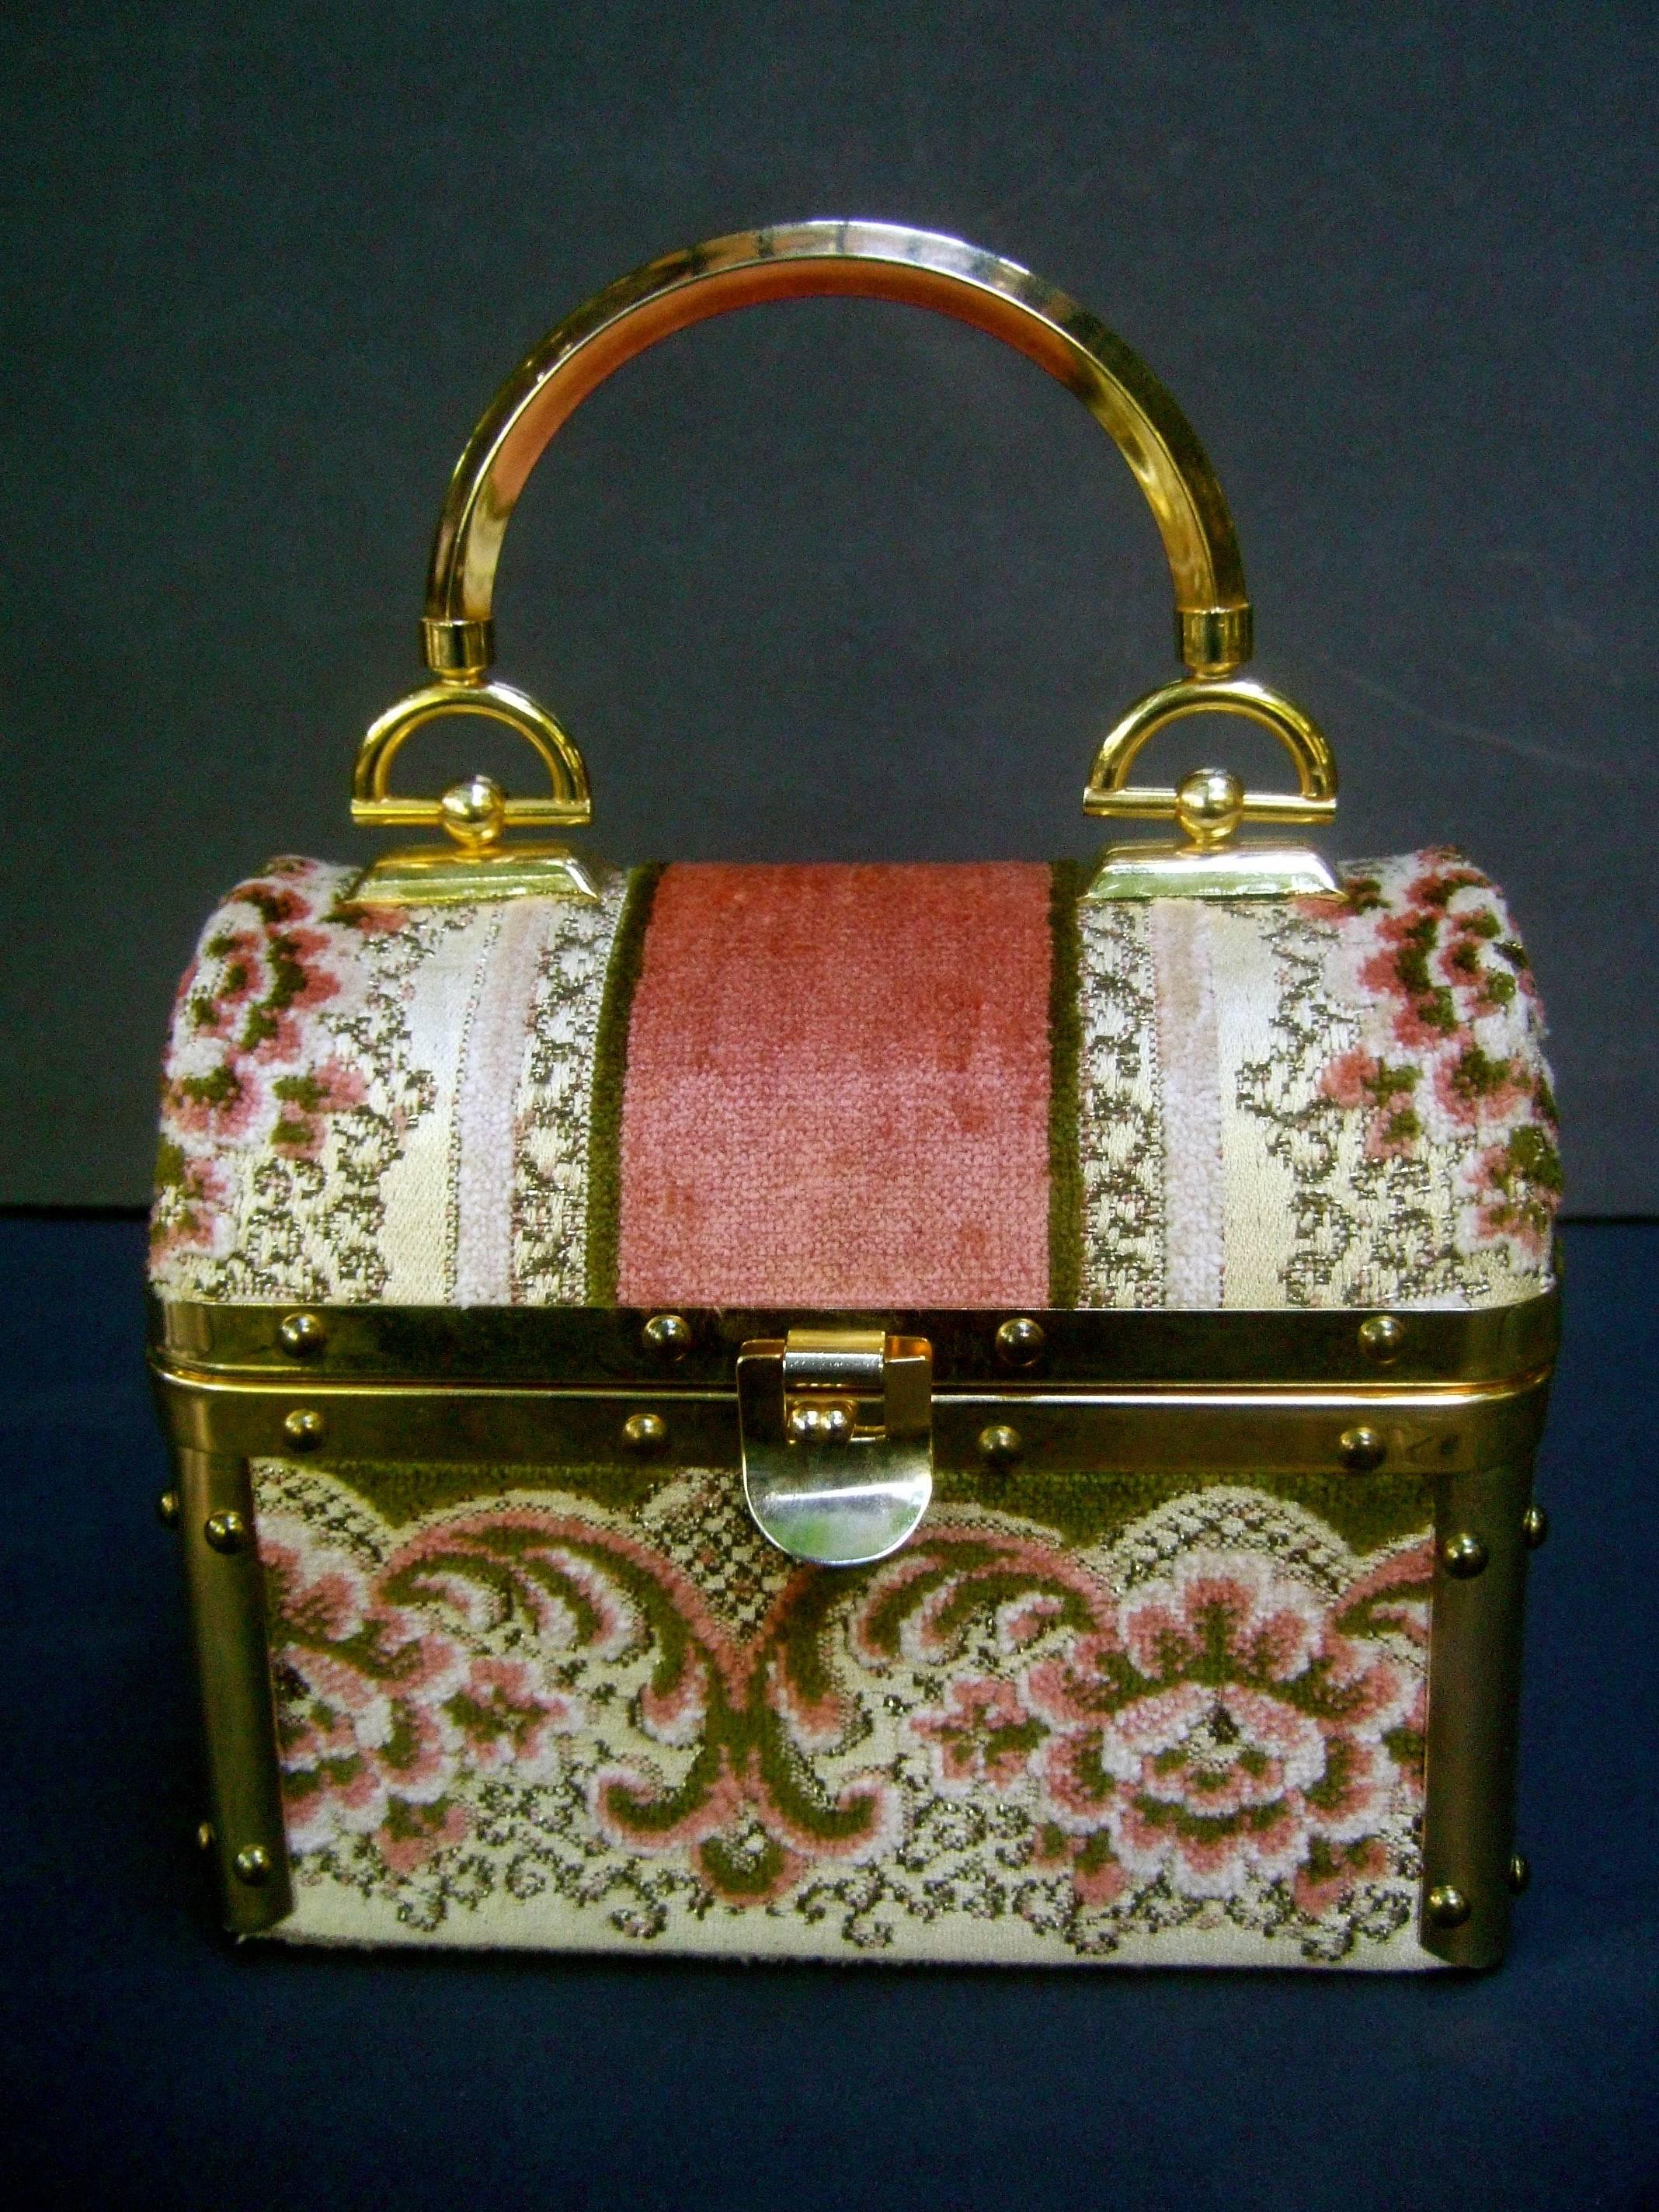 Borsa Bella Italian brocade box purse c 1970s
The chic retro handbag is covered with plush 
floral brocade juxtaposed with wide solid 
panels 

Adorned with sleek gilt metal hardware trim
and a gilt metal swivel handle. The interior is
lined in